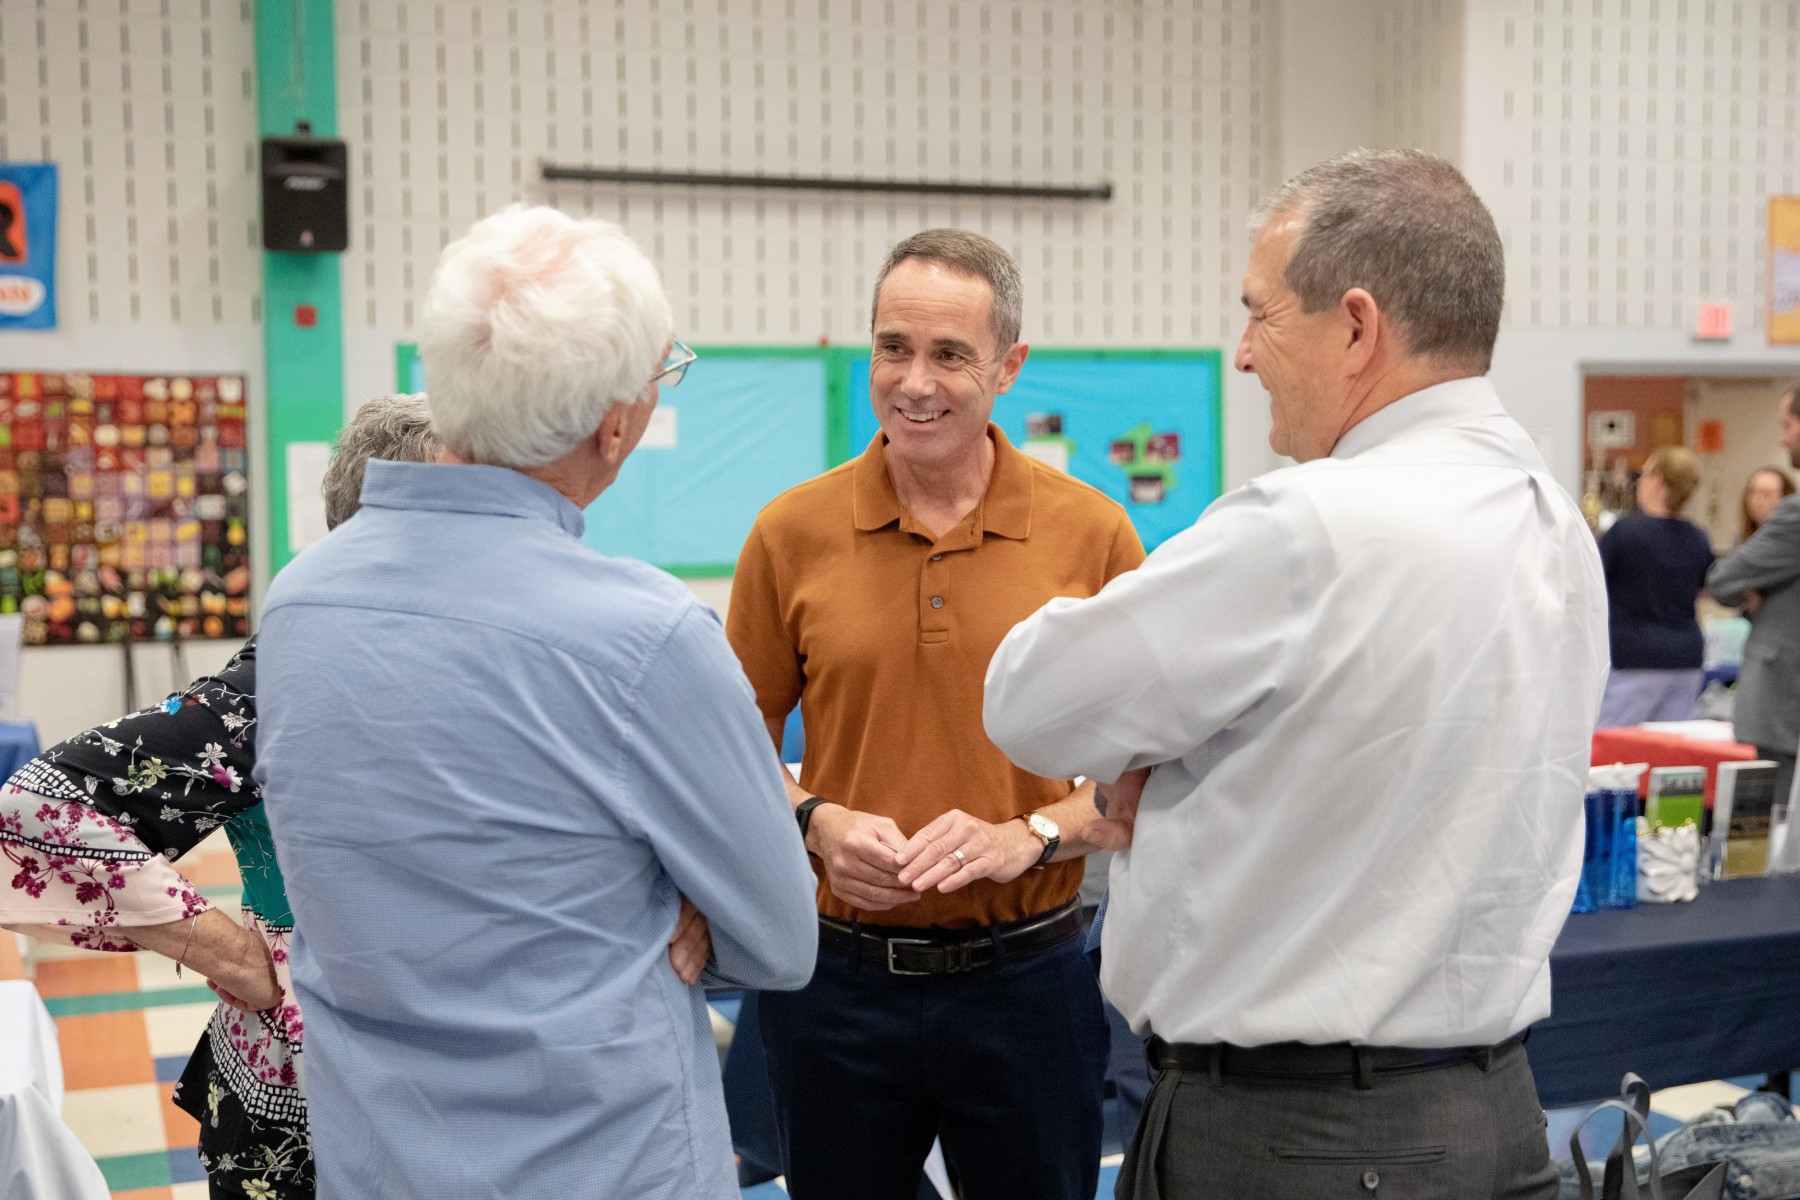 September 16, 2019: During National Recovery Month, state Senator Steve Santarsiero (D-10) hosted an Addiction Prevention and Recovery Open House at William Penn Middle School in Yardley.